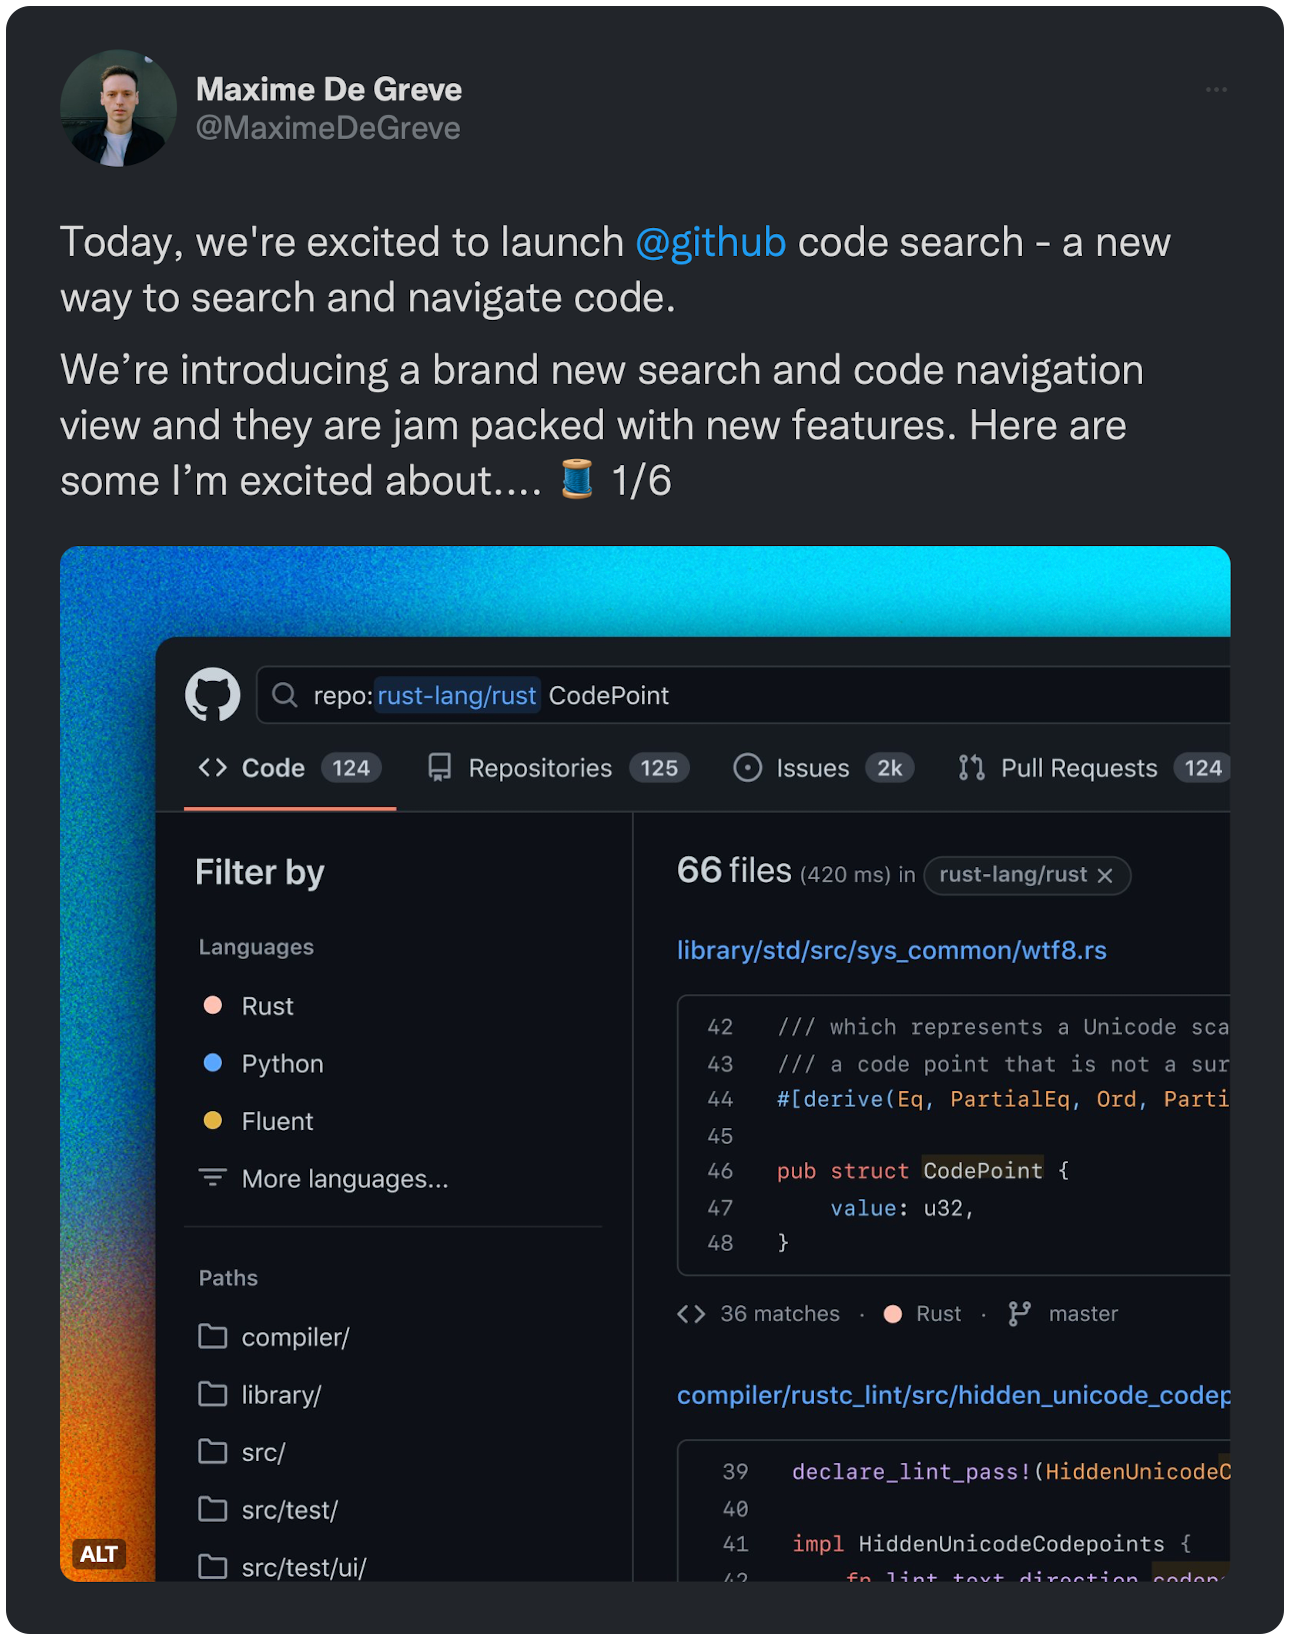 Today, we're excited to launch @github code search - a new way to search and navigate code. We’re introducing a brand new search and code navigation view and they are jam packed with new features. Here are some I’m excited about.... 🧵 1/6